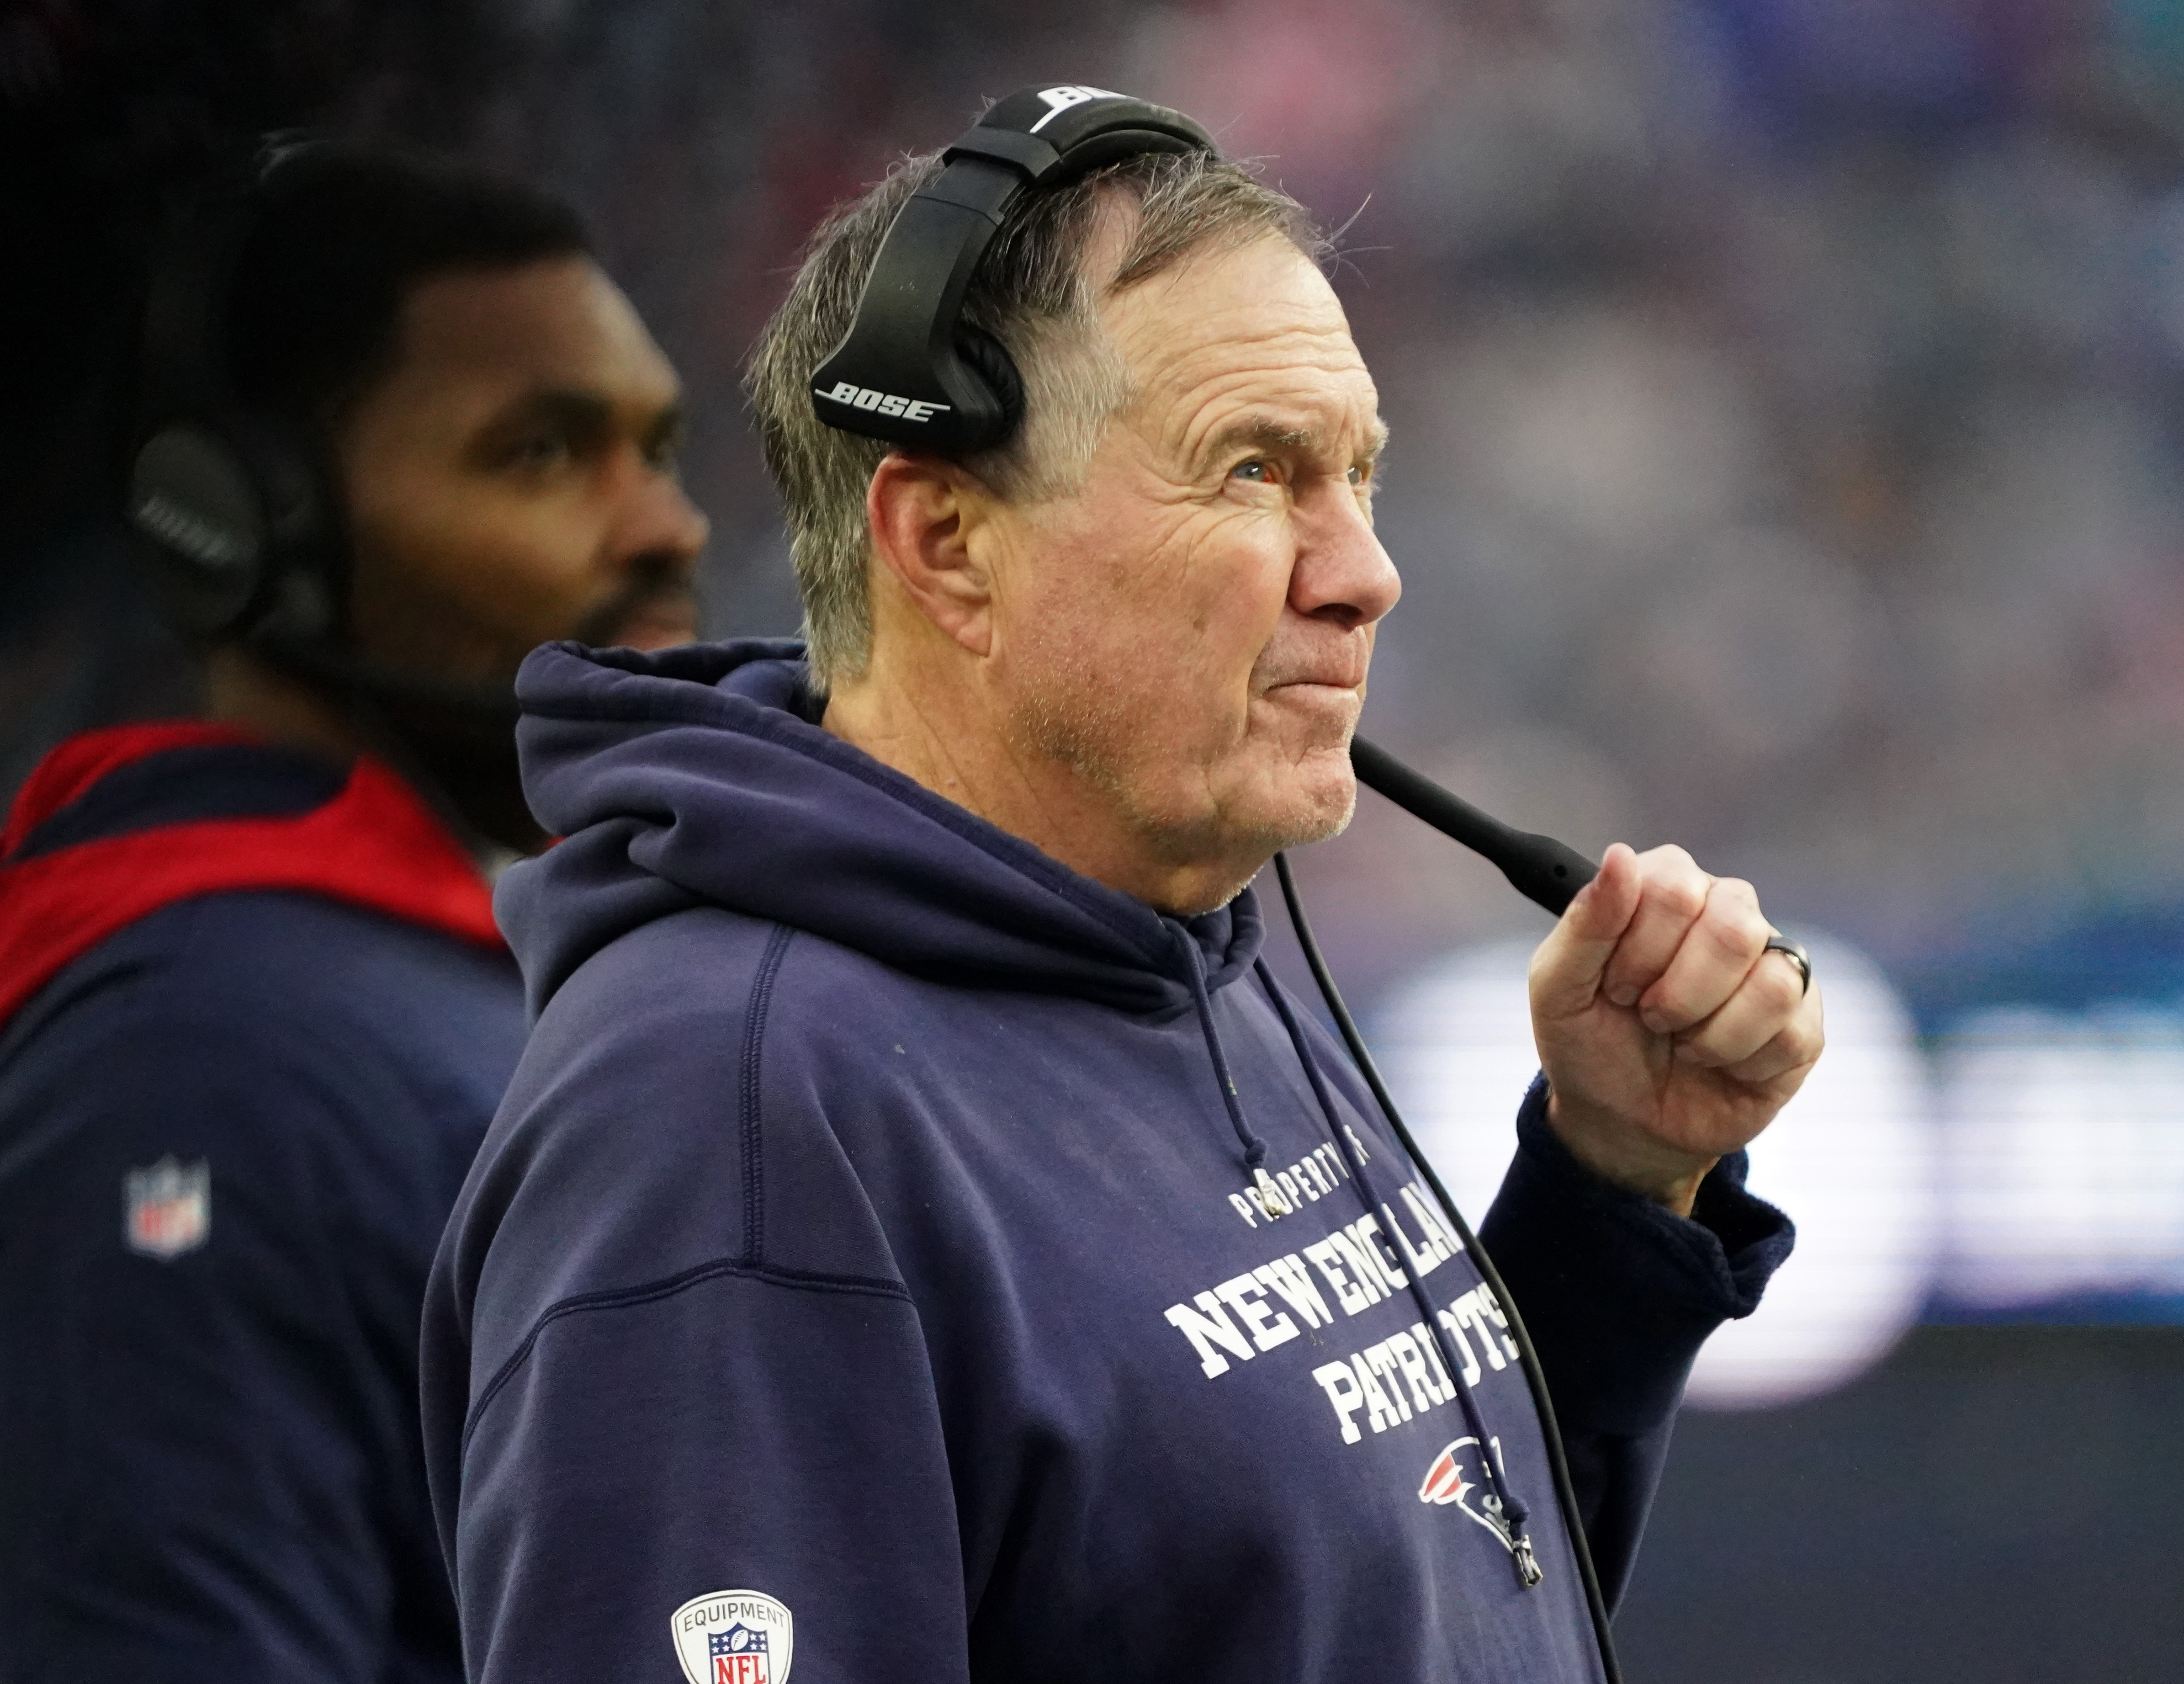 New England Patriots head coach Bill Belichick watches from the sideline as they take on the Jacksonville Jaguars in the second half at Gillette Stadium.